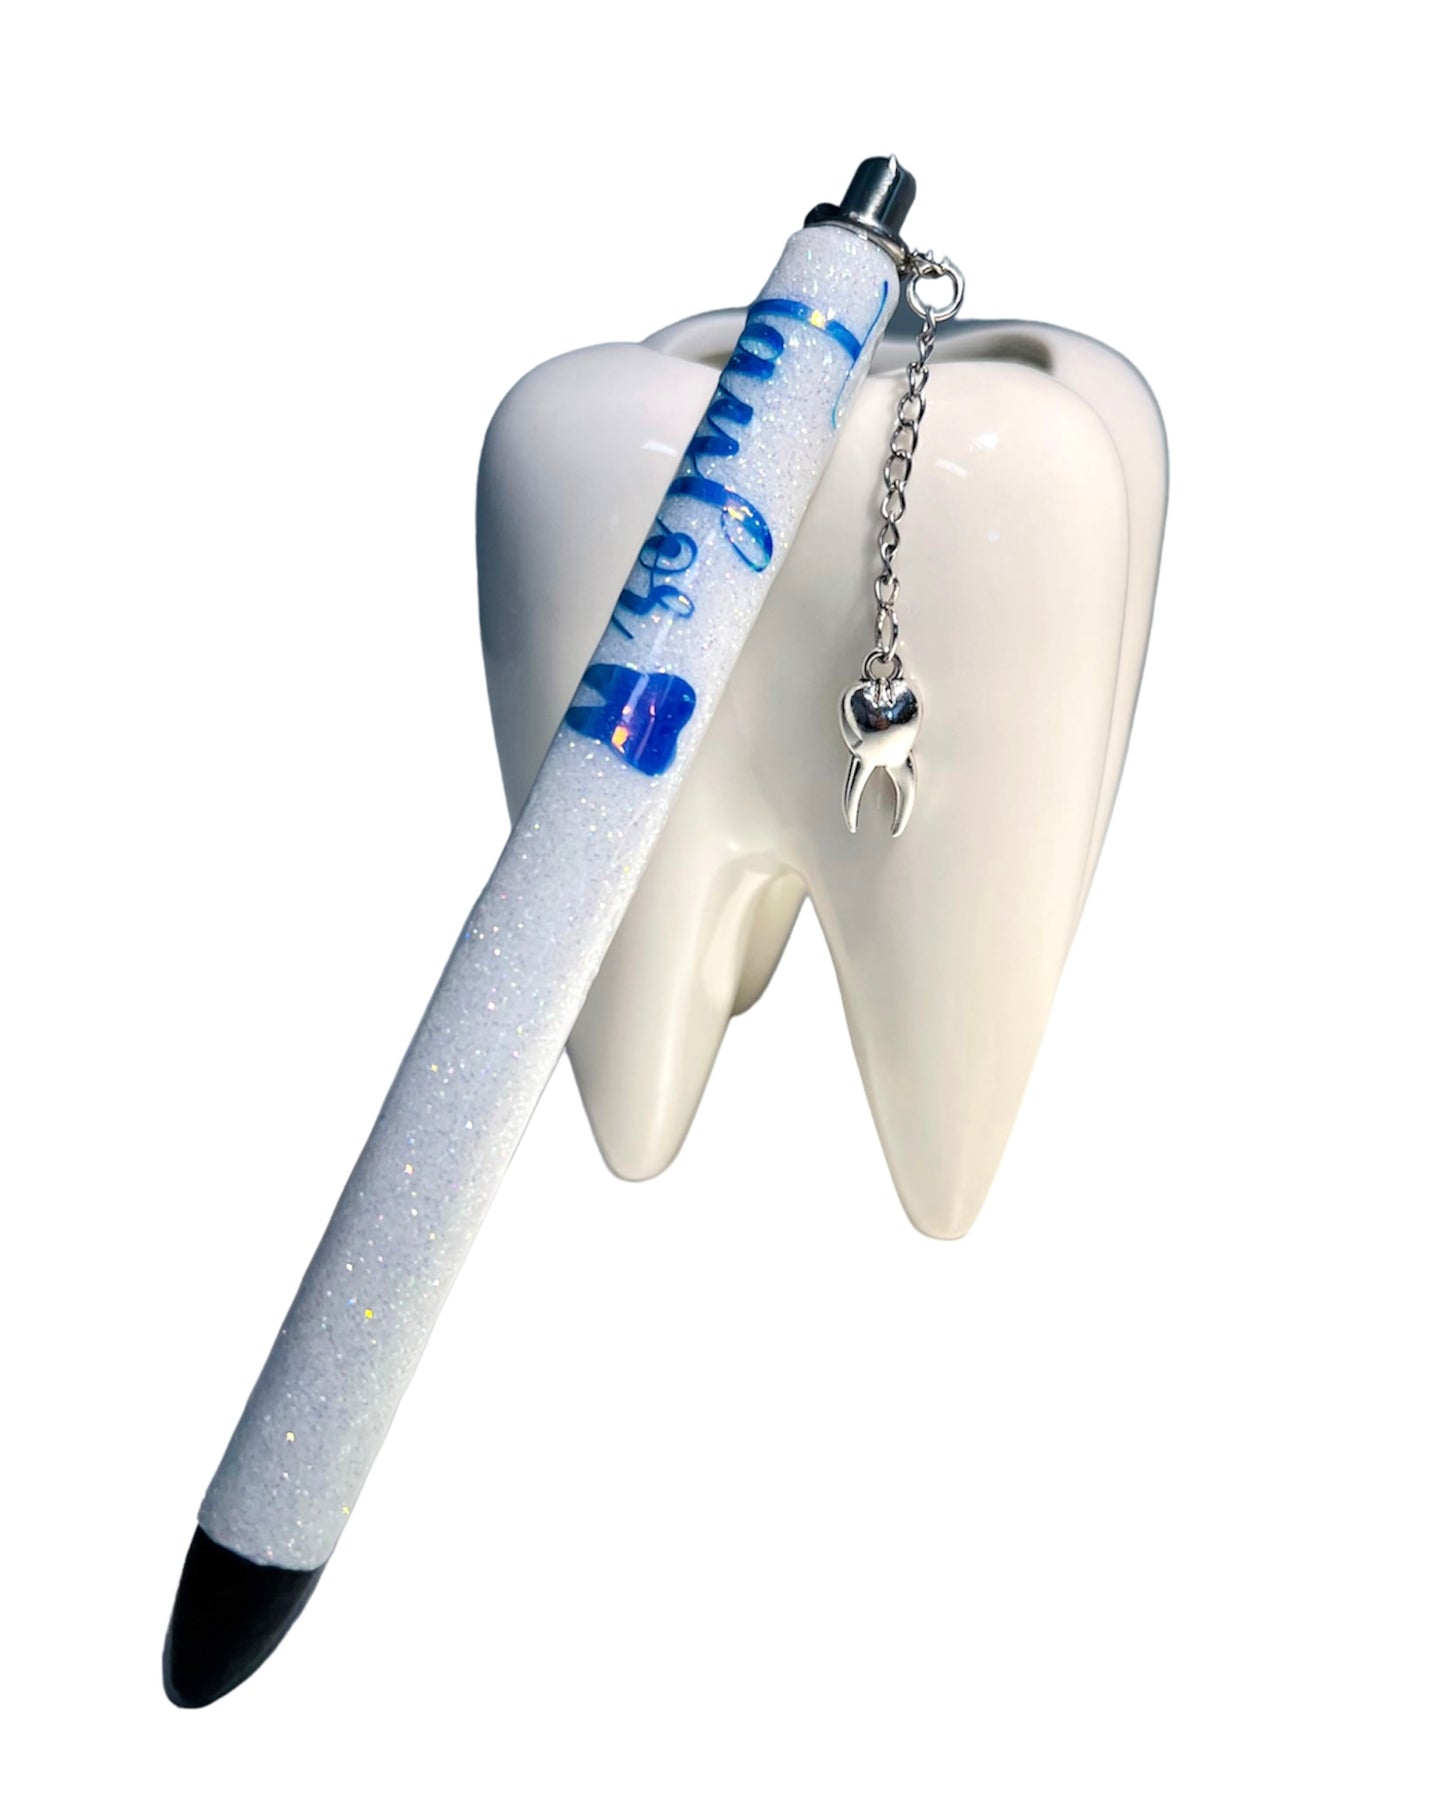 Dental Inspired Pen with Charm.